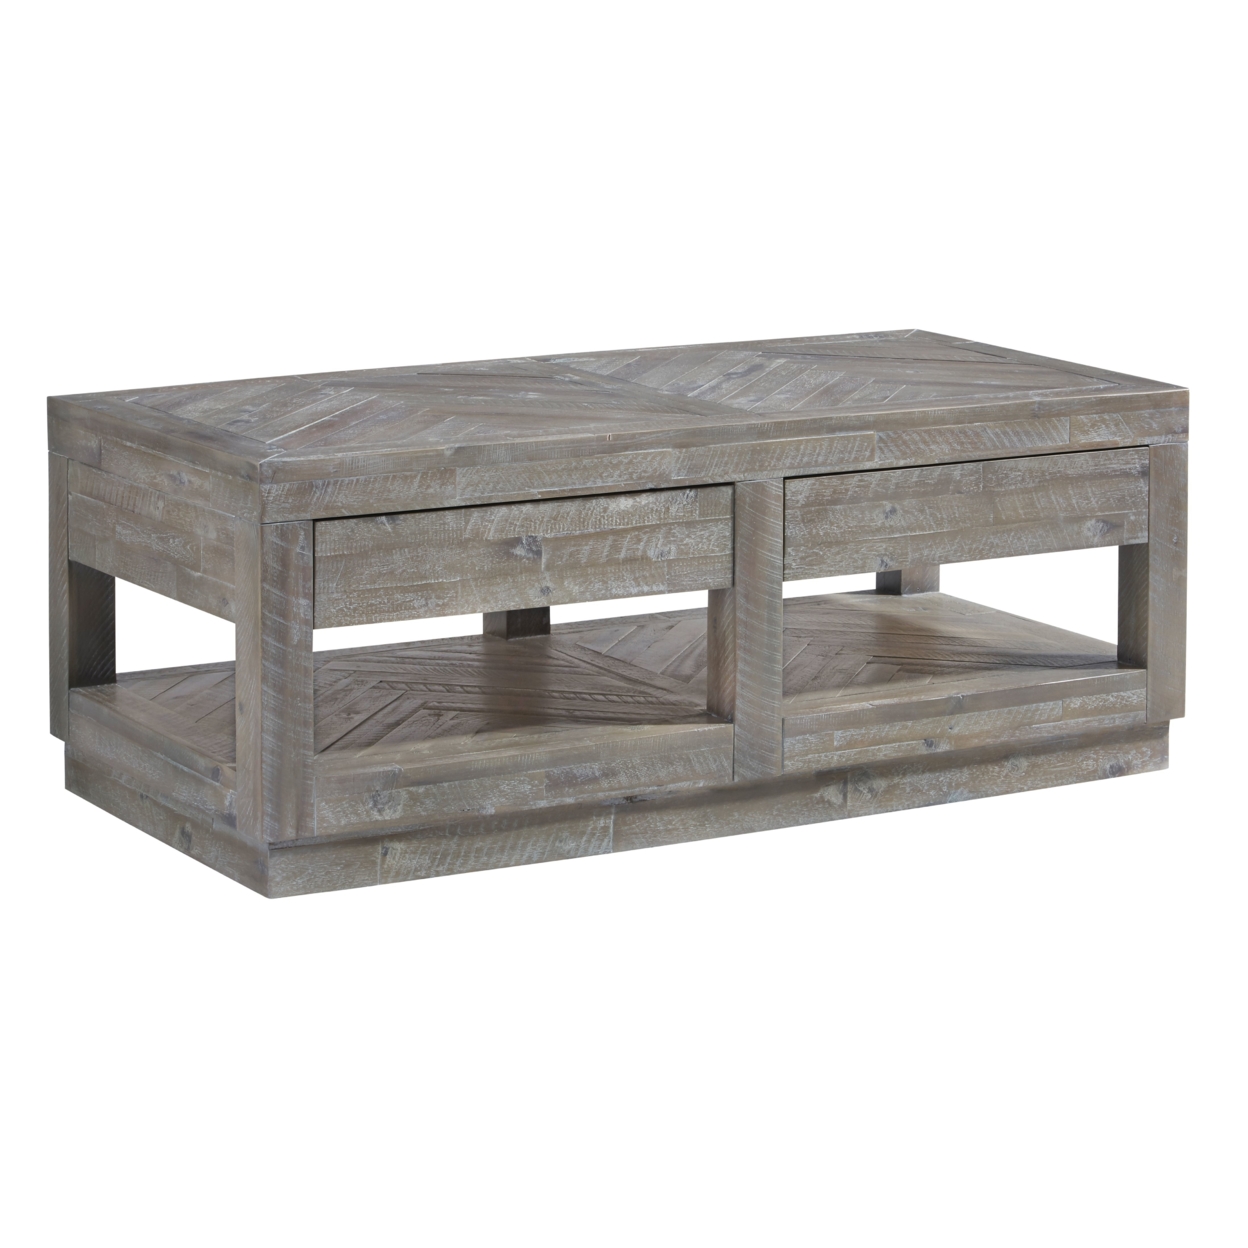 Two Drawer And Bottom Shelf Coffee Table With Flattened Base, Rustic Latte Gray- Saltoro Sherpi